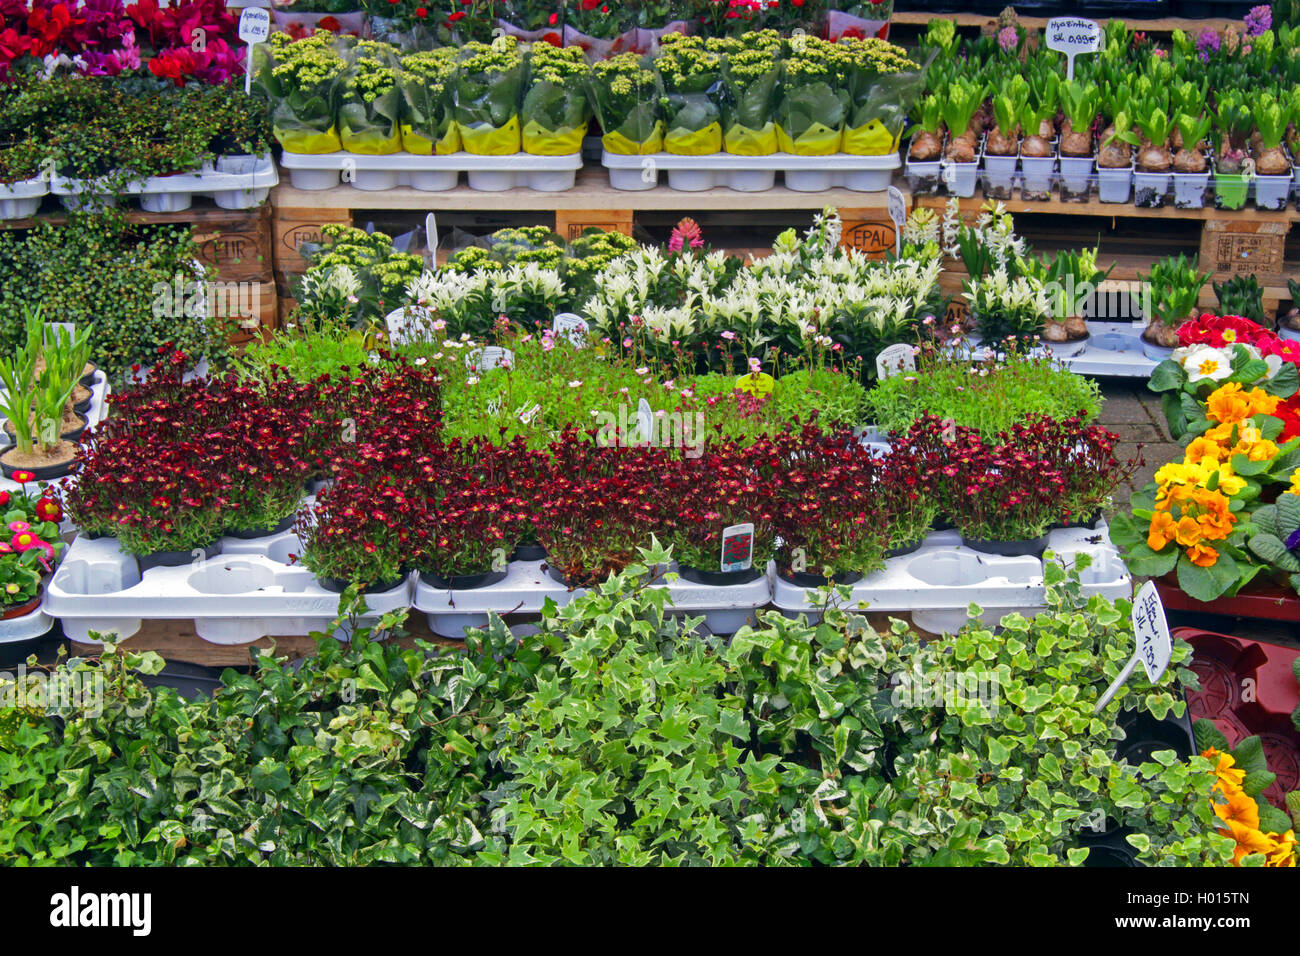 selling ob garden and indoor plants in front of a supermarket, Germany Stock Photo